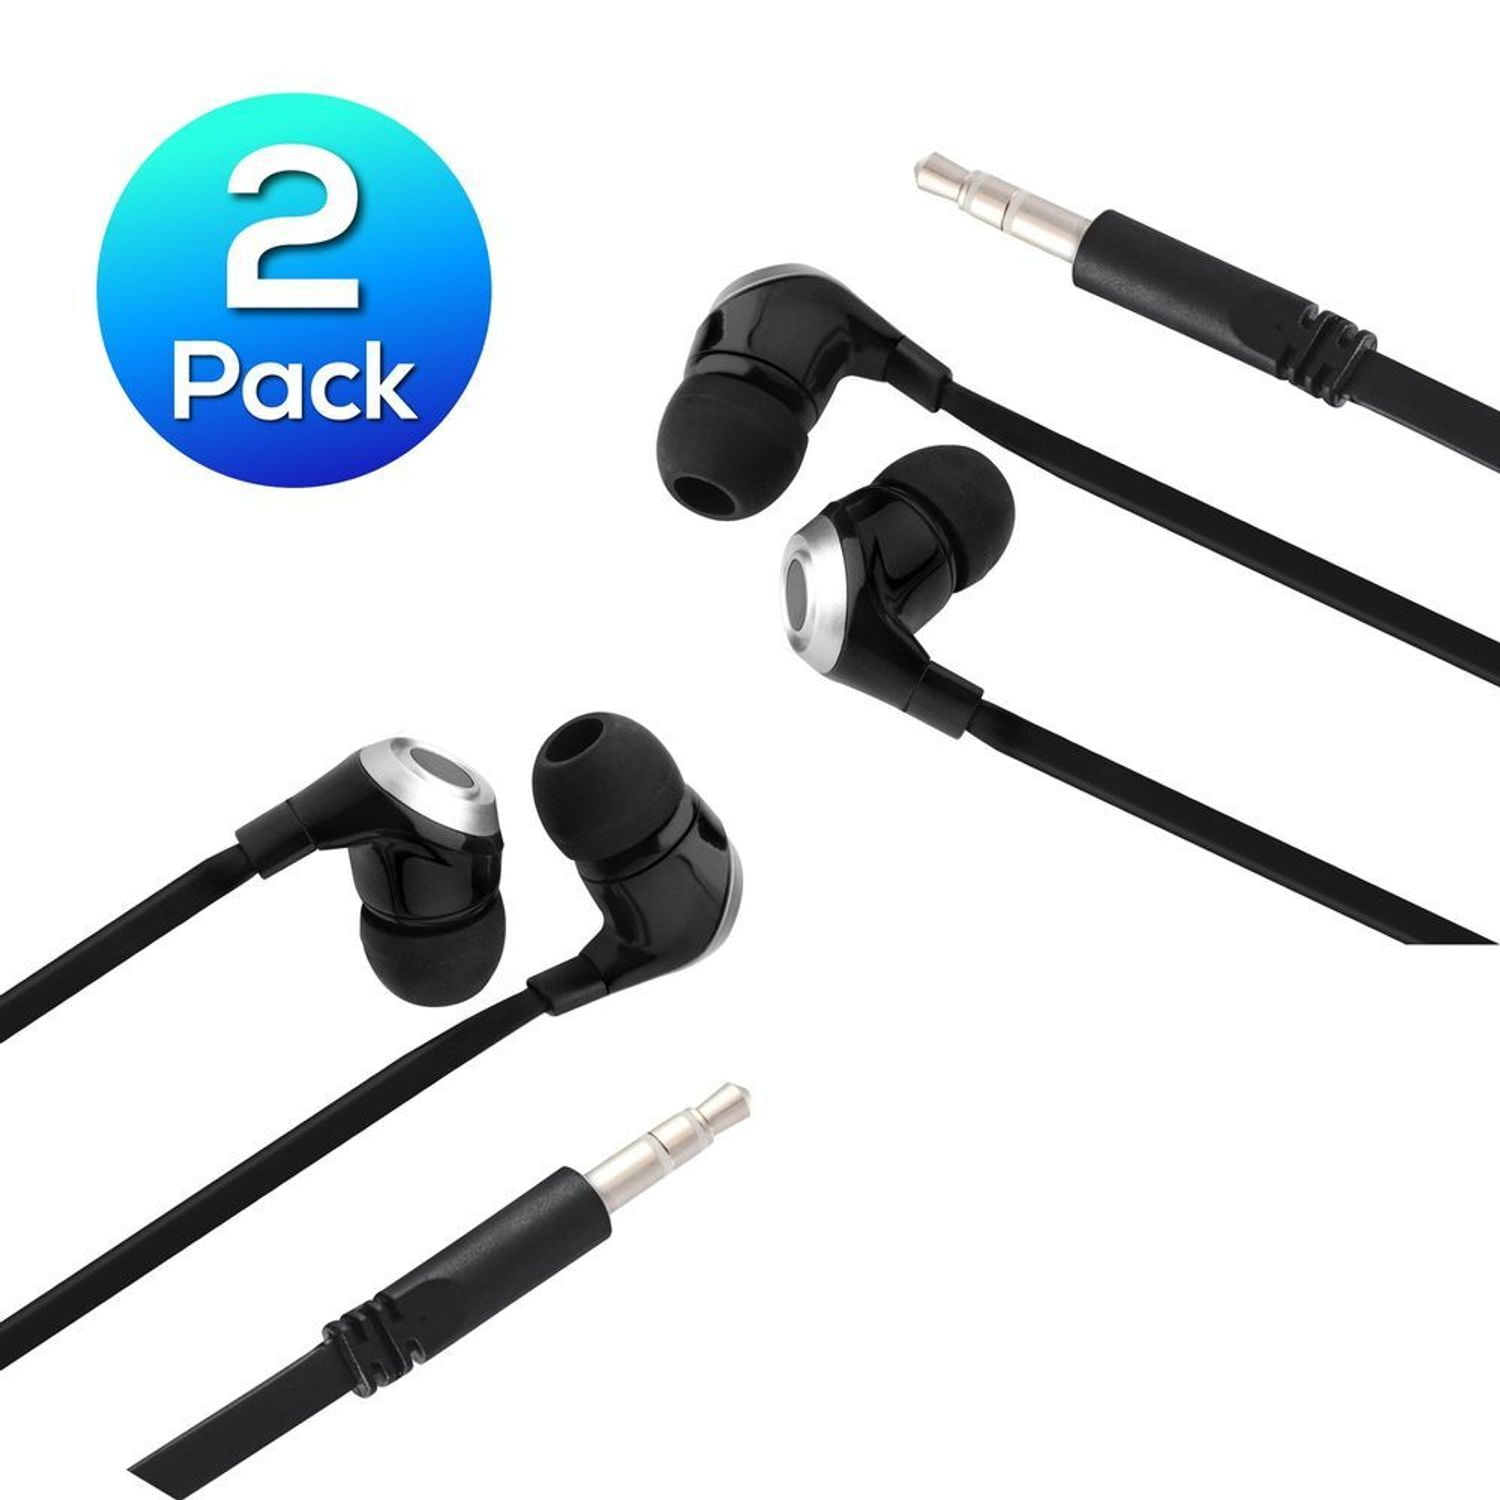 2 Pack 3.5mm Headphones In Ear EarBuds by Insten Universal Stereo Headset Earphones for Cell Phone Tablet Earbuds iPhone 6 6S 5S SE iPod iPad Samsung Galaxy J1 J3 J5 J7 S9 S8 S7 Note 5 LG Stylo 3 2